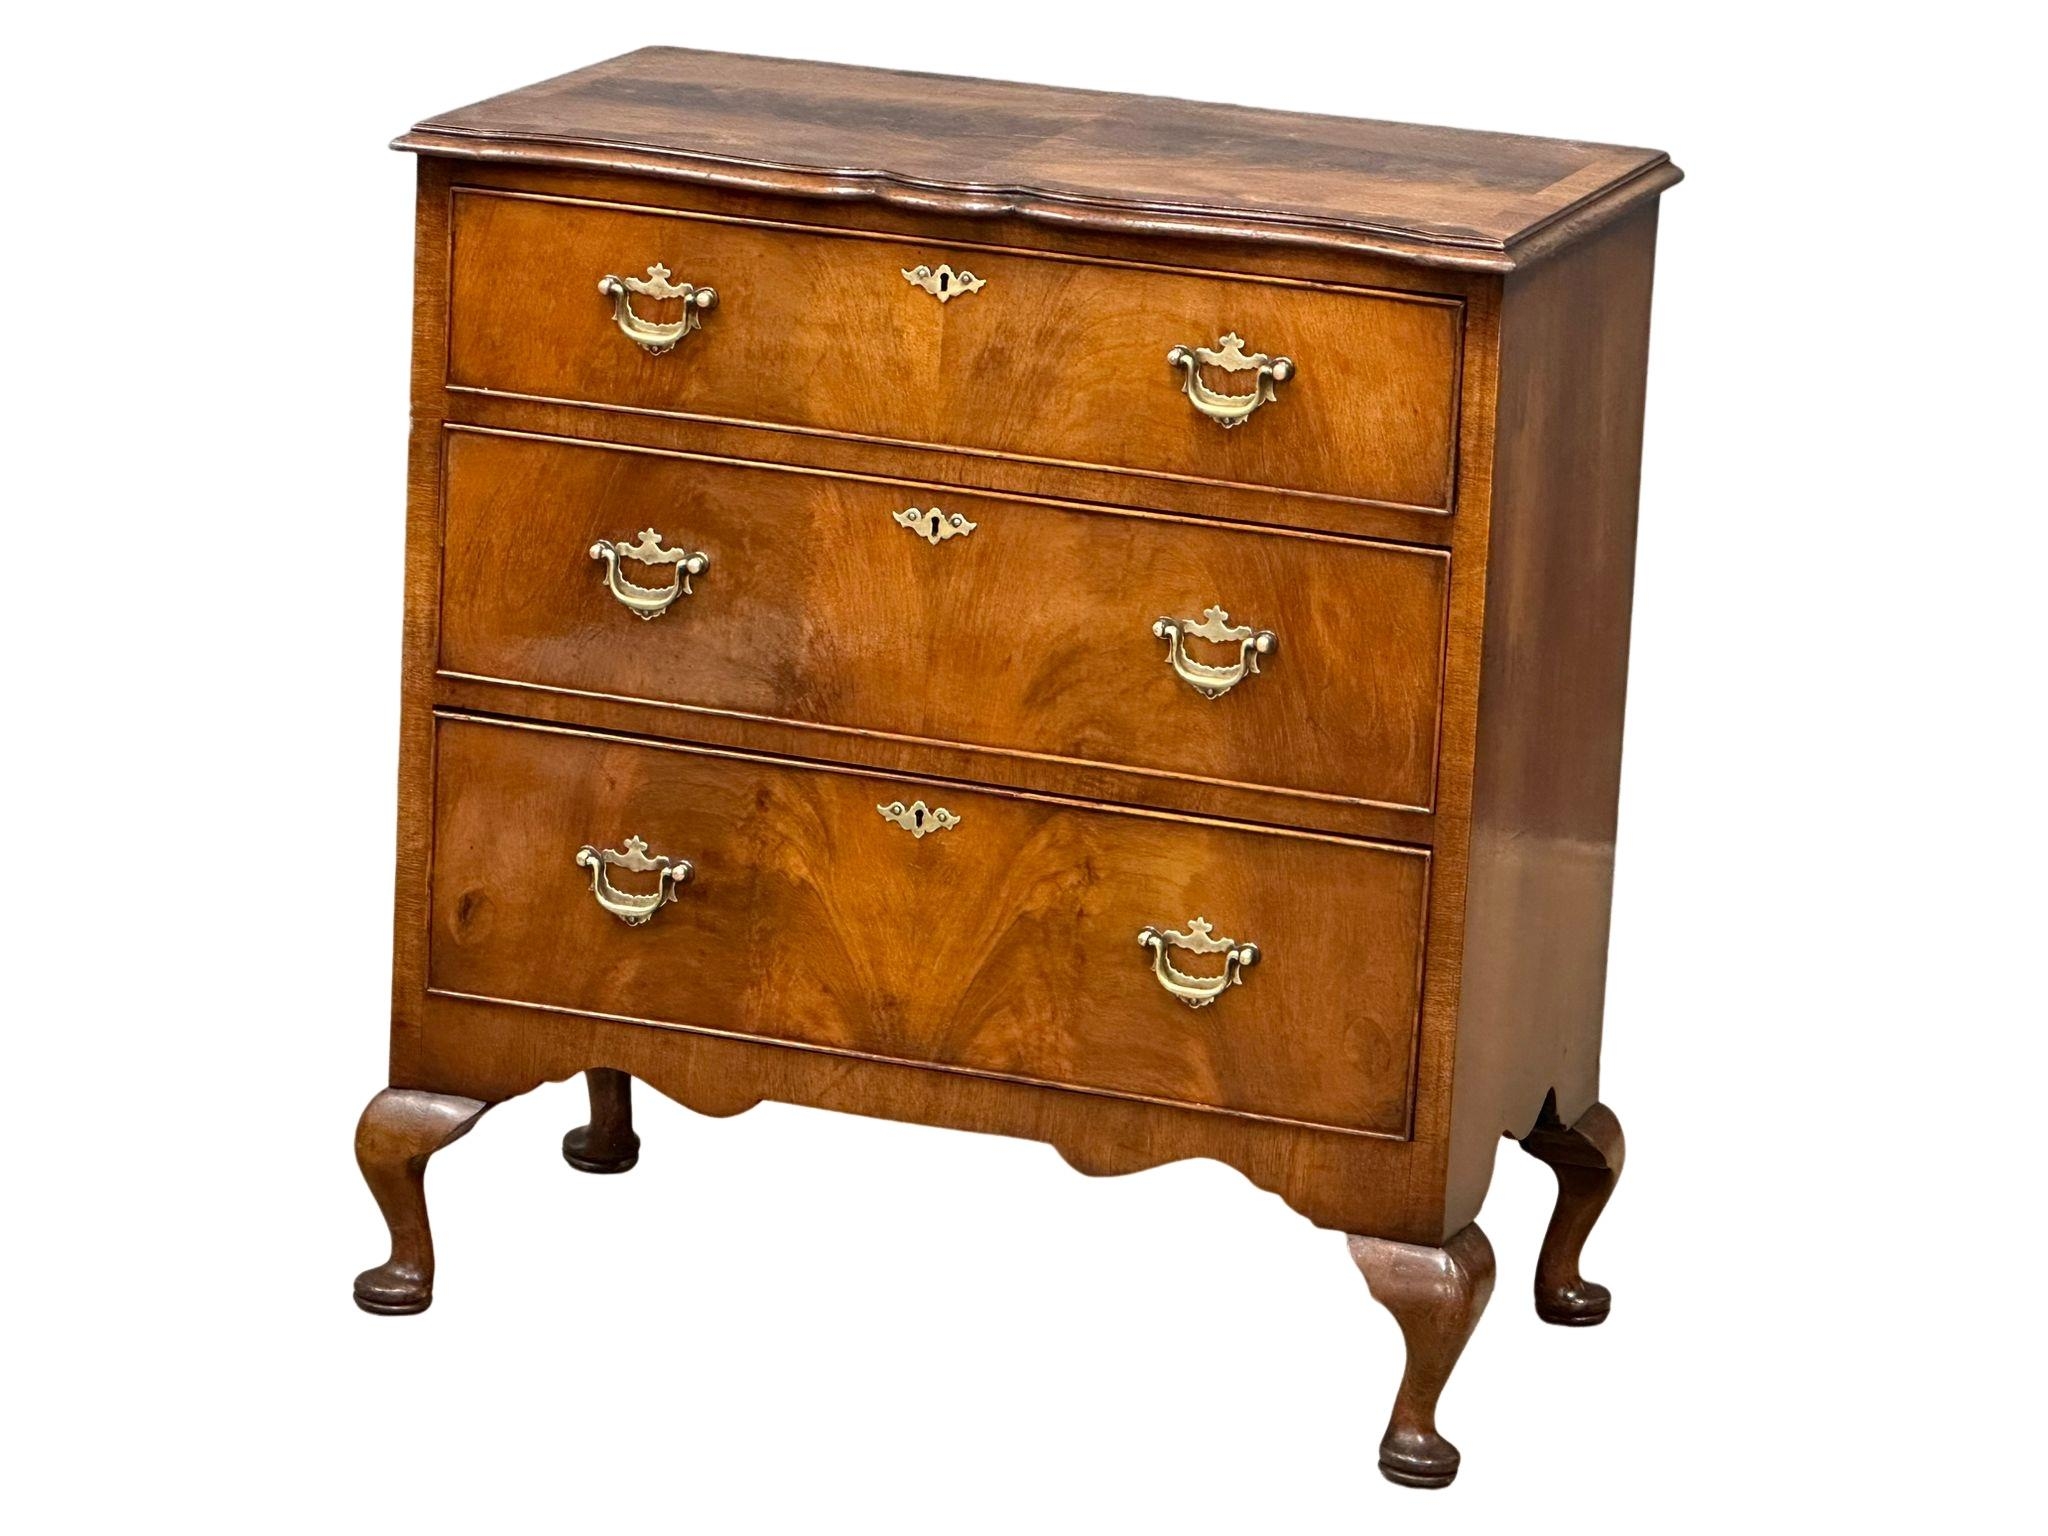 An Early 20th Century George I style walnut chest of drawers. 1930. 84x46x90cm - Image 5 of 5